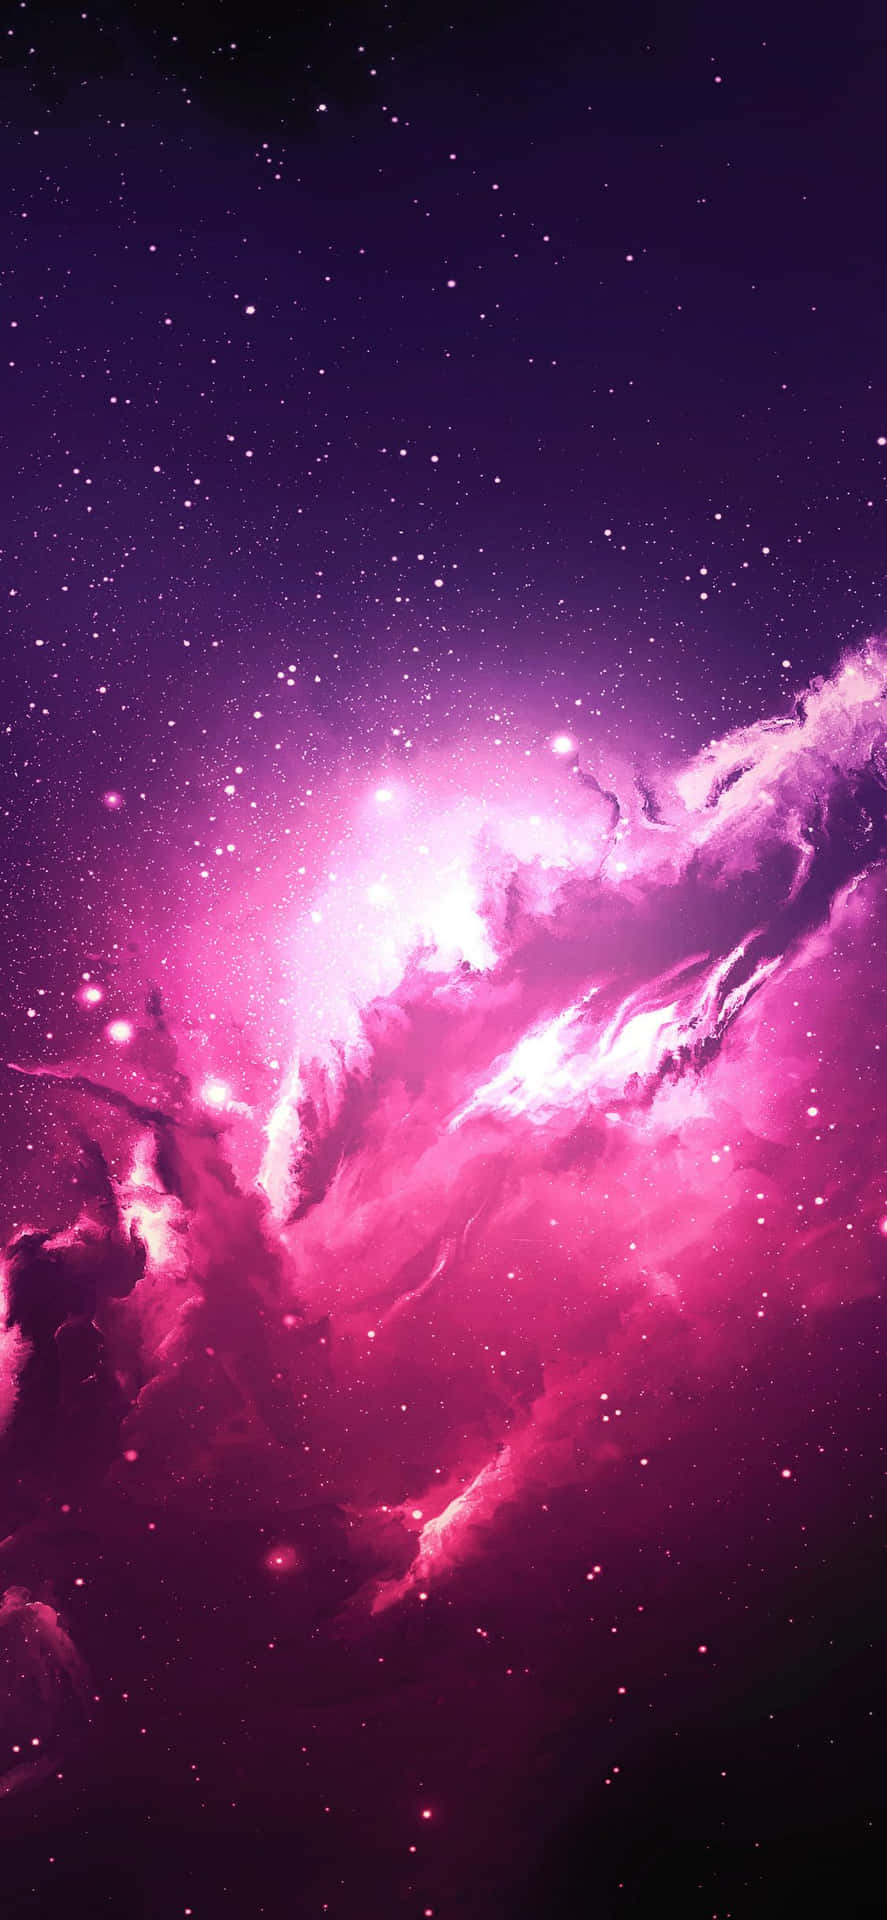 A Purple Space With Stars And Clouds Wallpaper